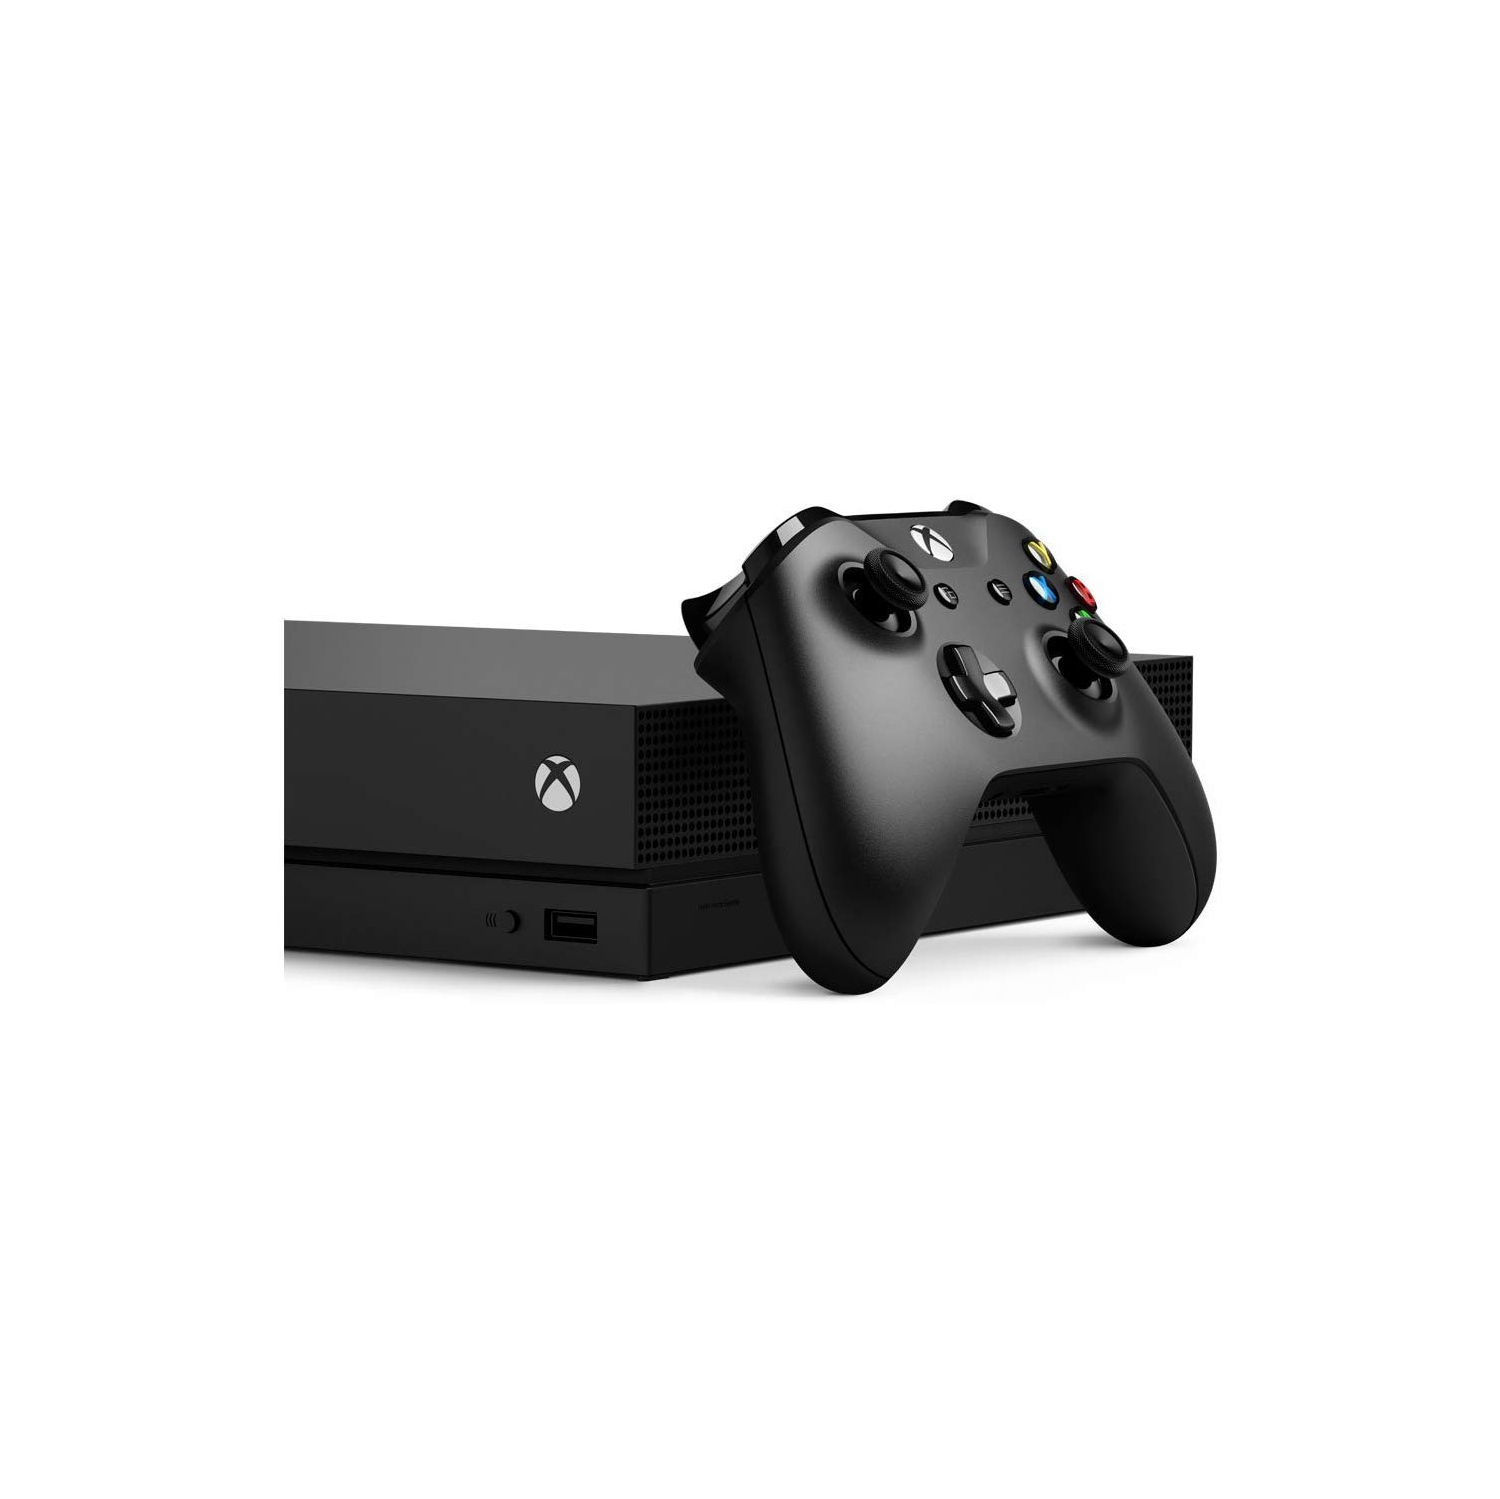 Xbox One X 1TB Console with Controller - Certified Refurbished